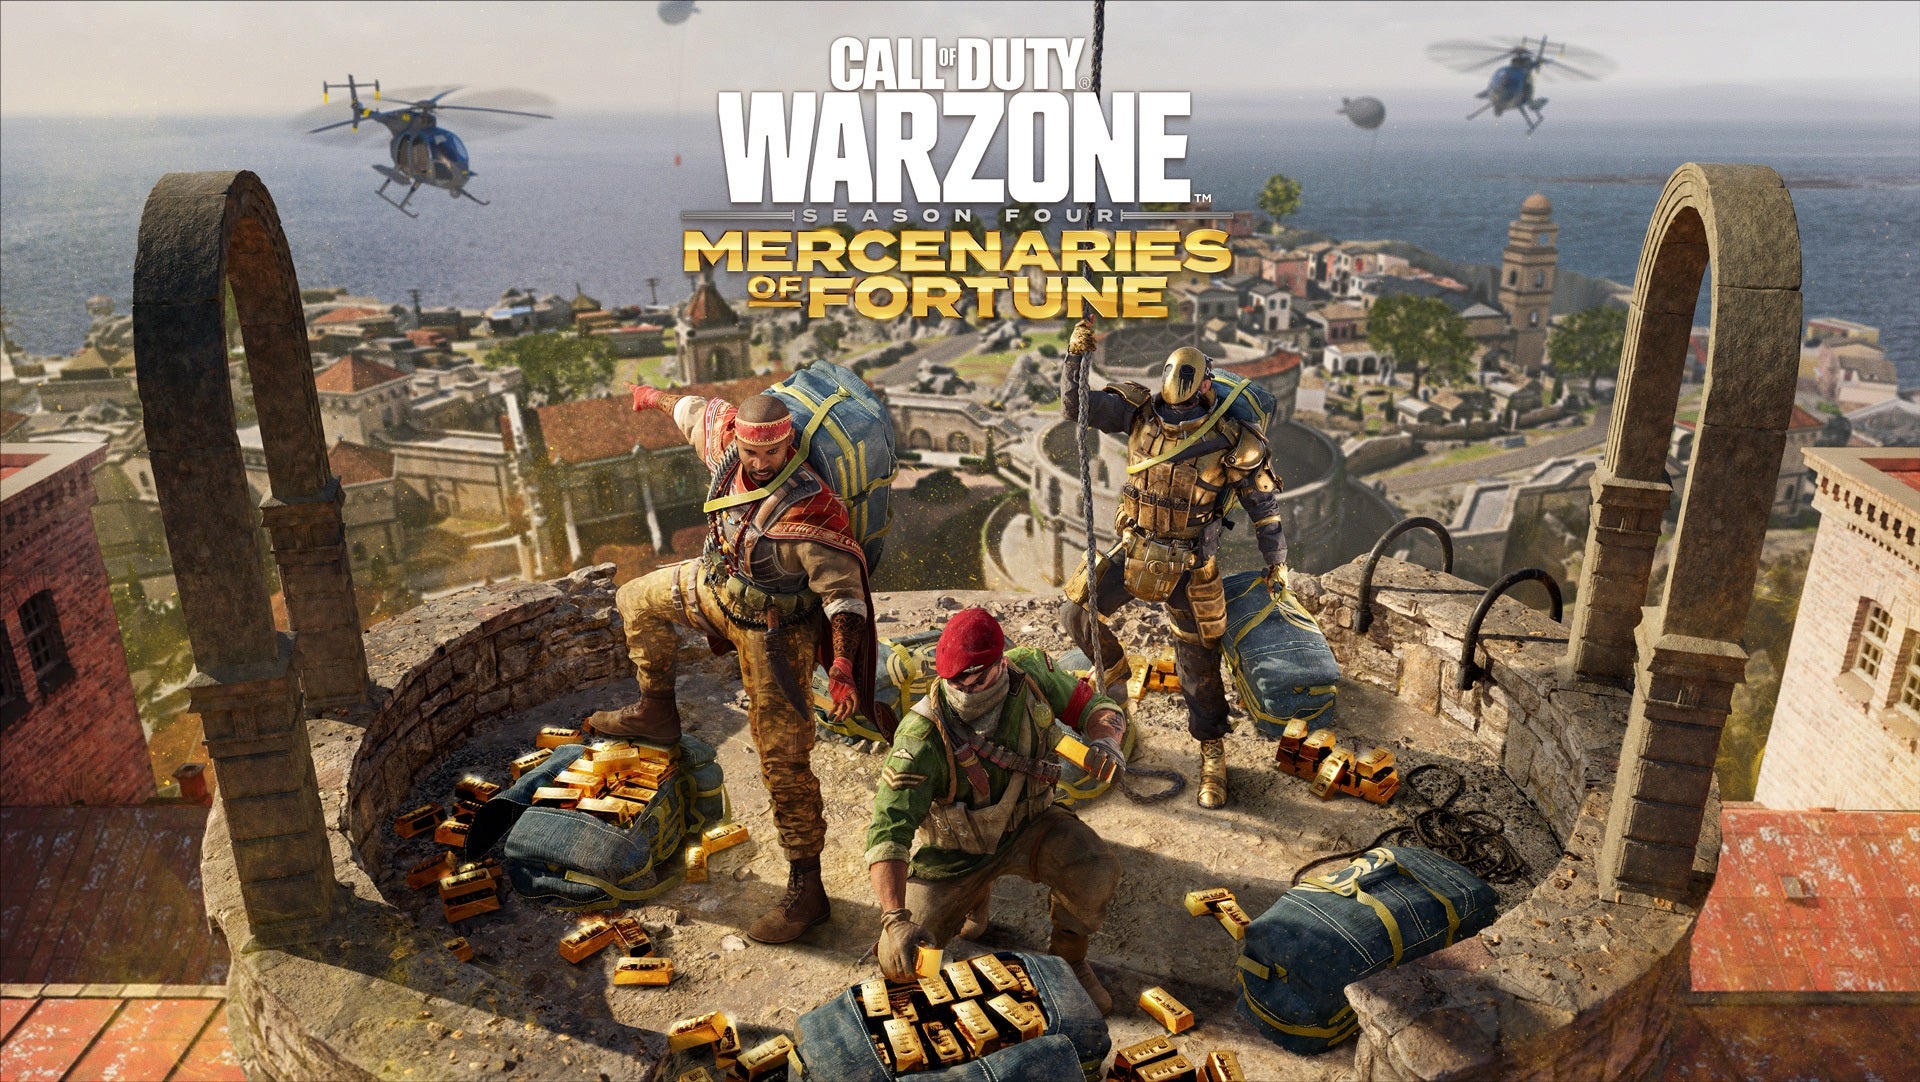 Official Warzone season 4 image showing soldiers and gold on rooftop